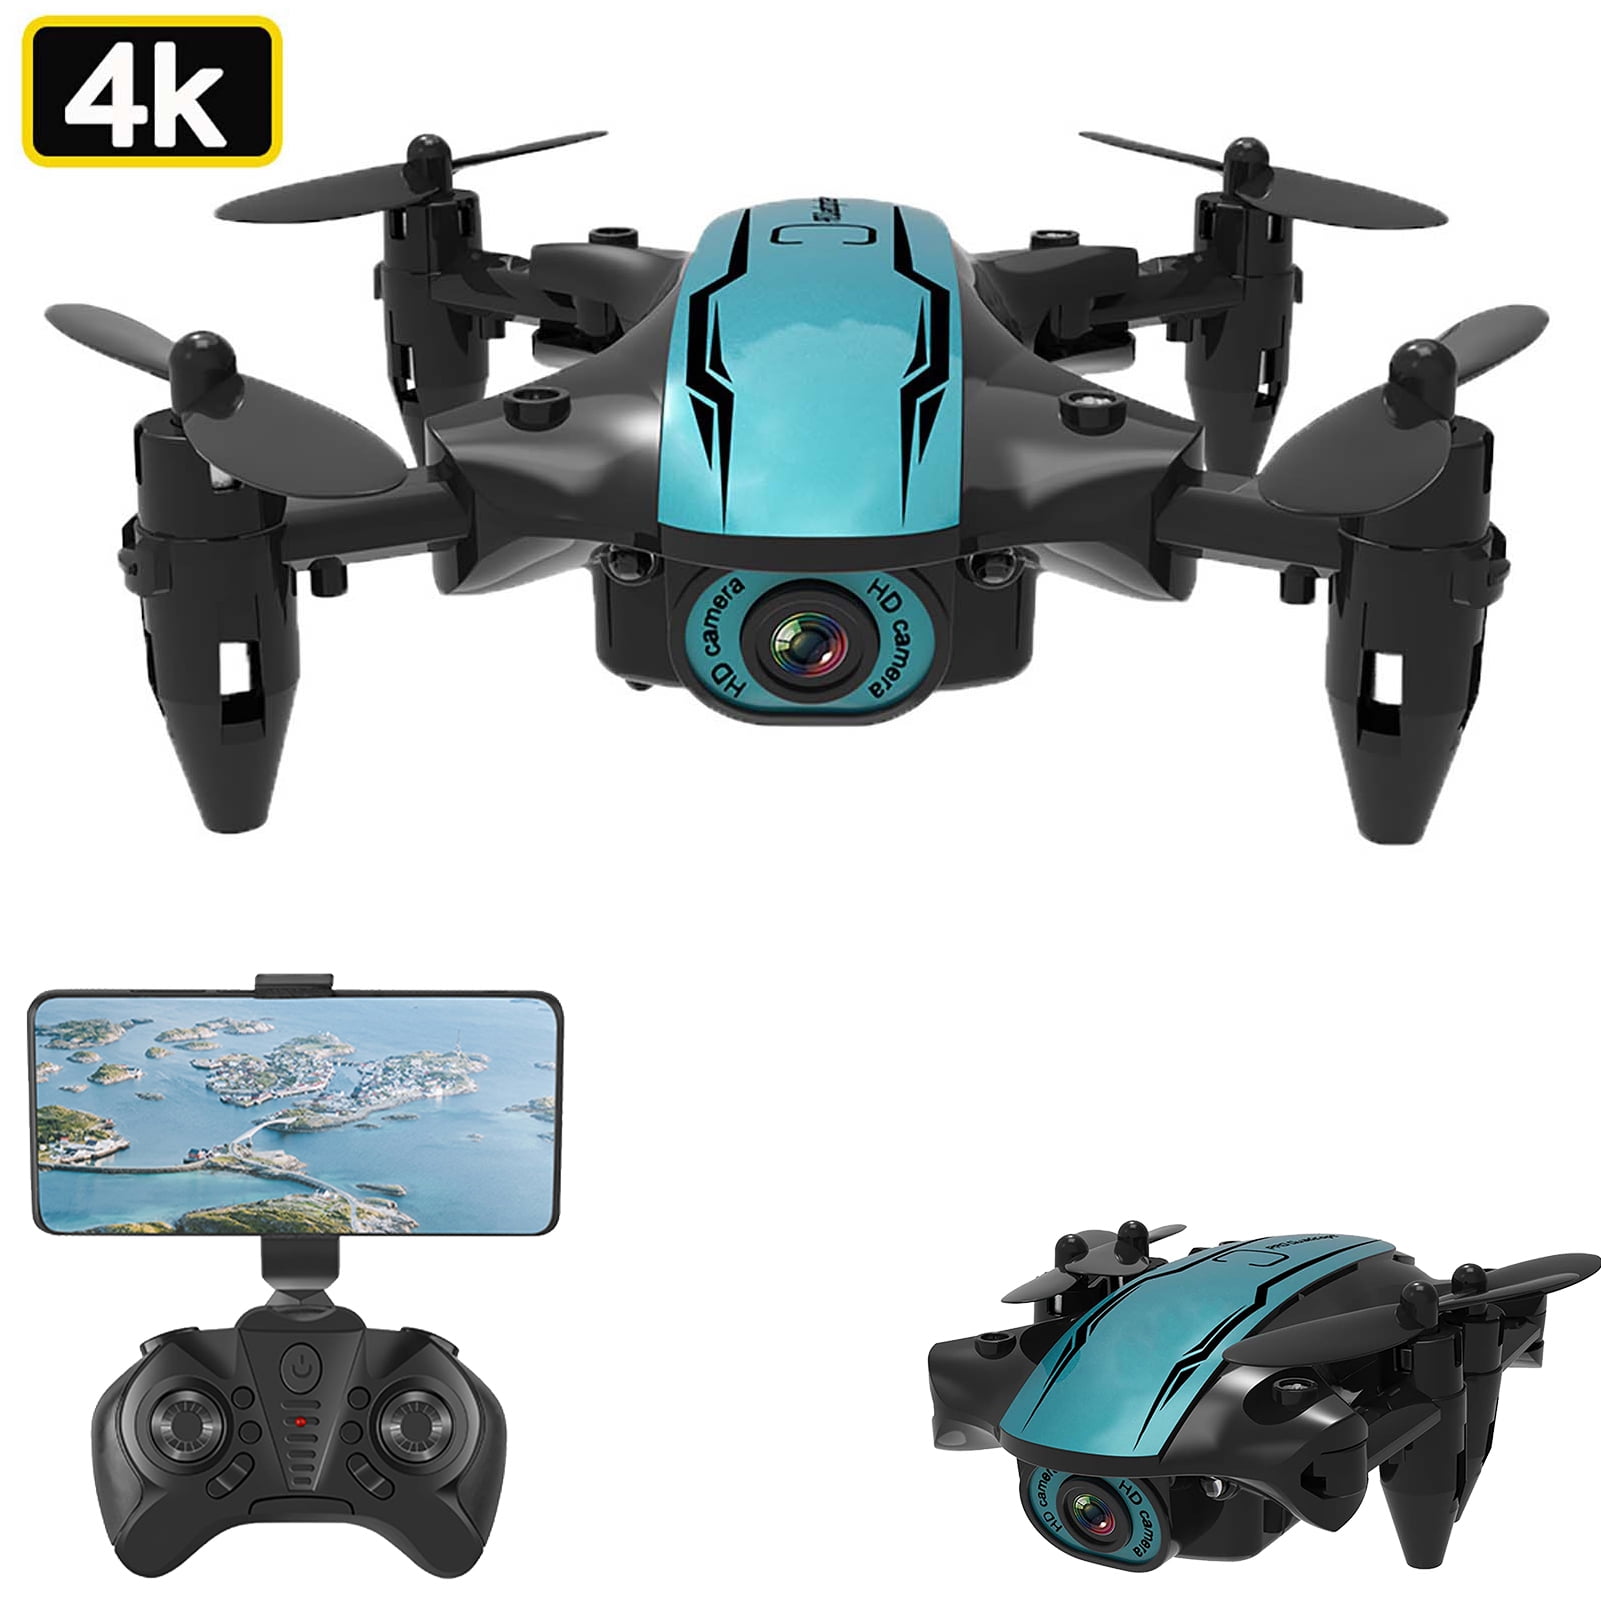 Details about   NEW FPV Wifi RC Drone With HD Camera Aircraft Foldable Quadcopter Selfie Toys 0 